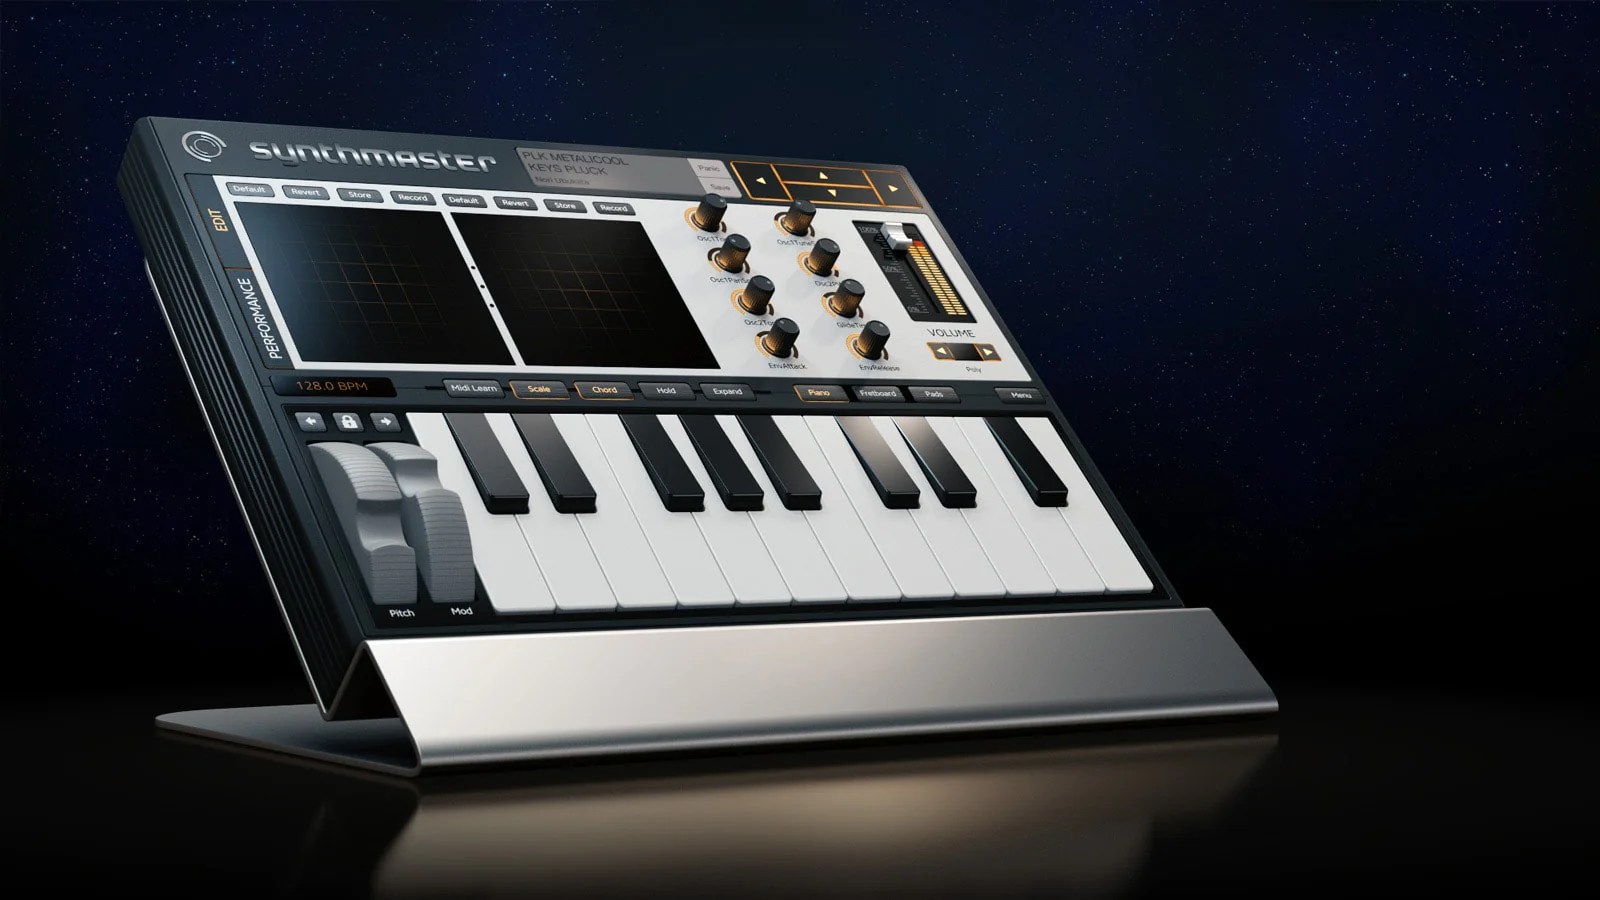 Synthmaster iOS Synth UI design and artwork by Voger